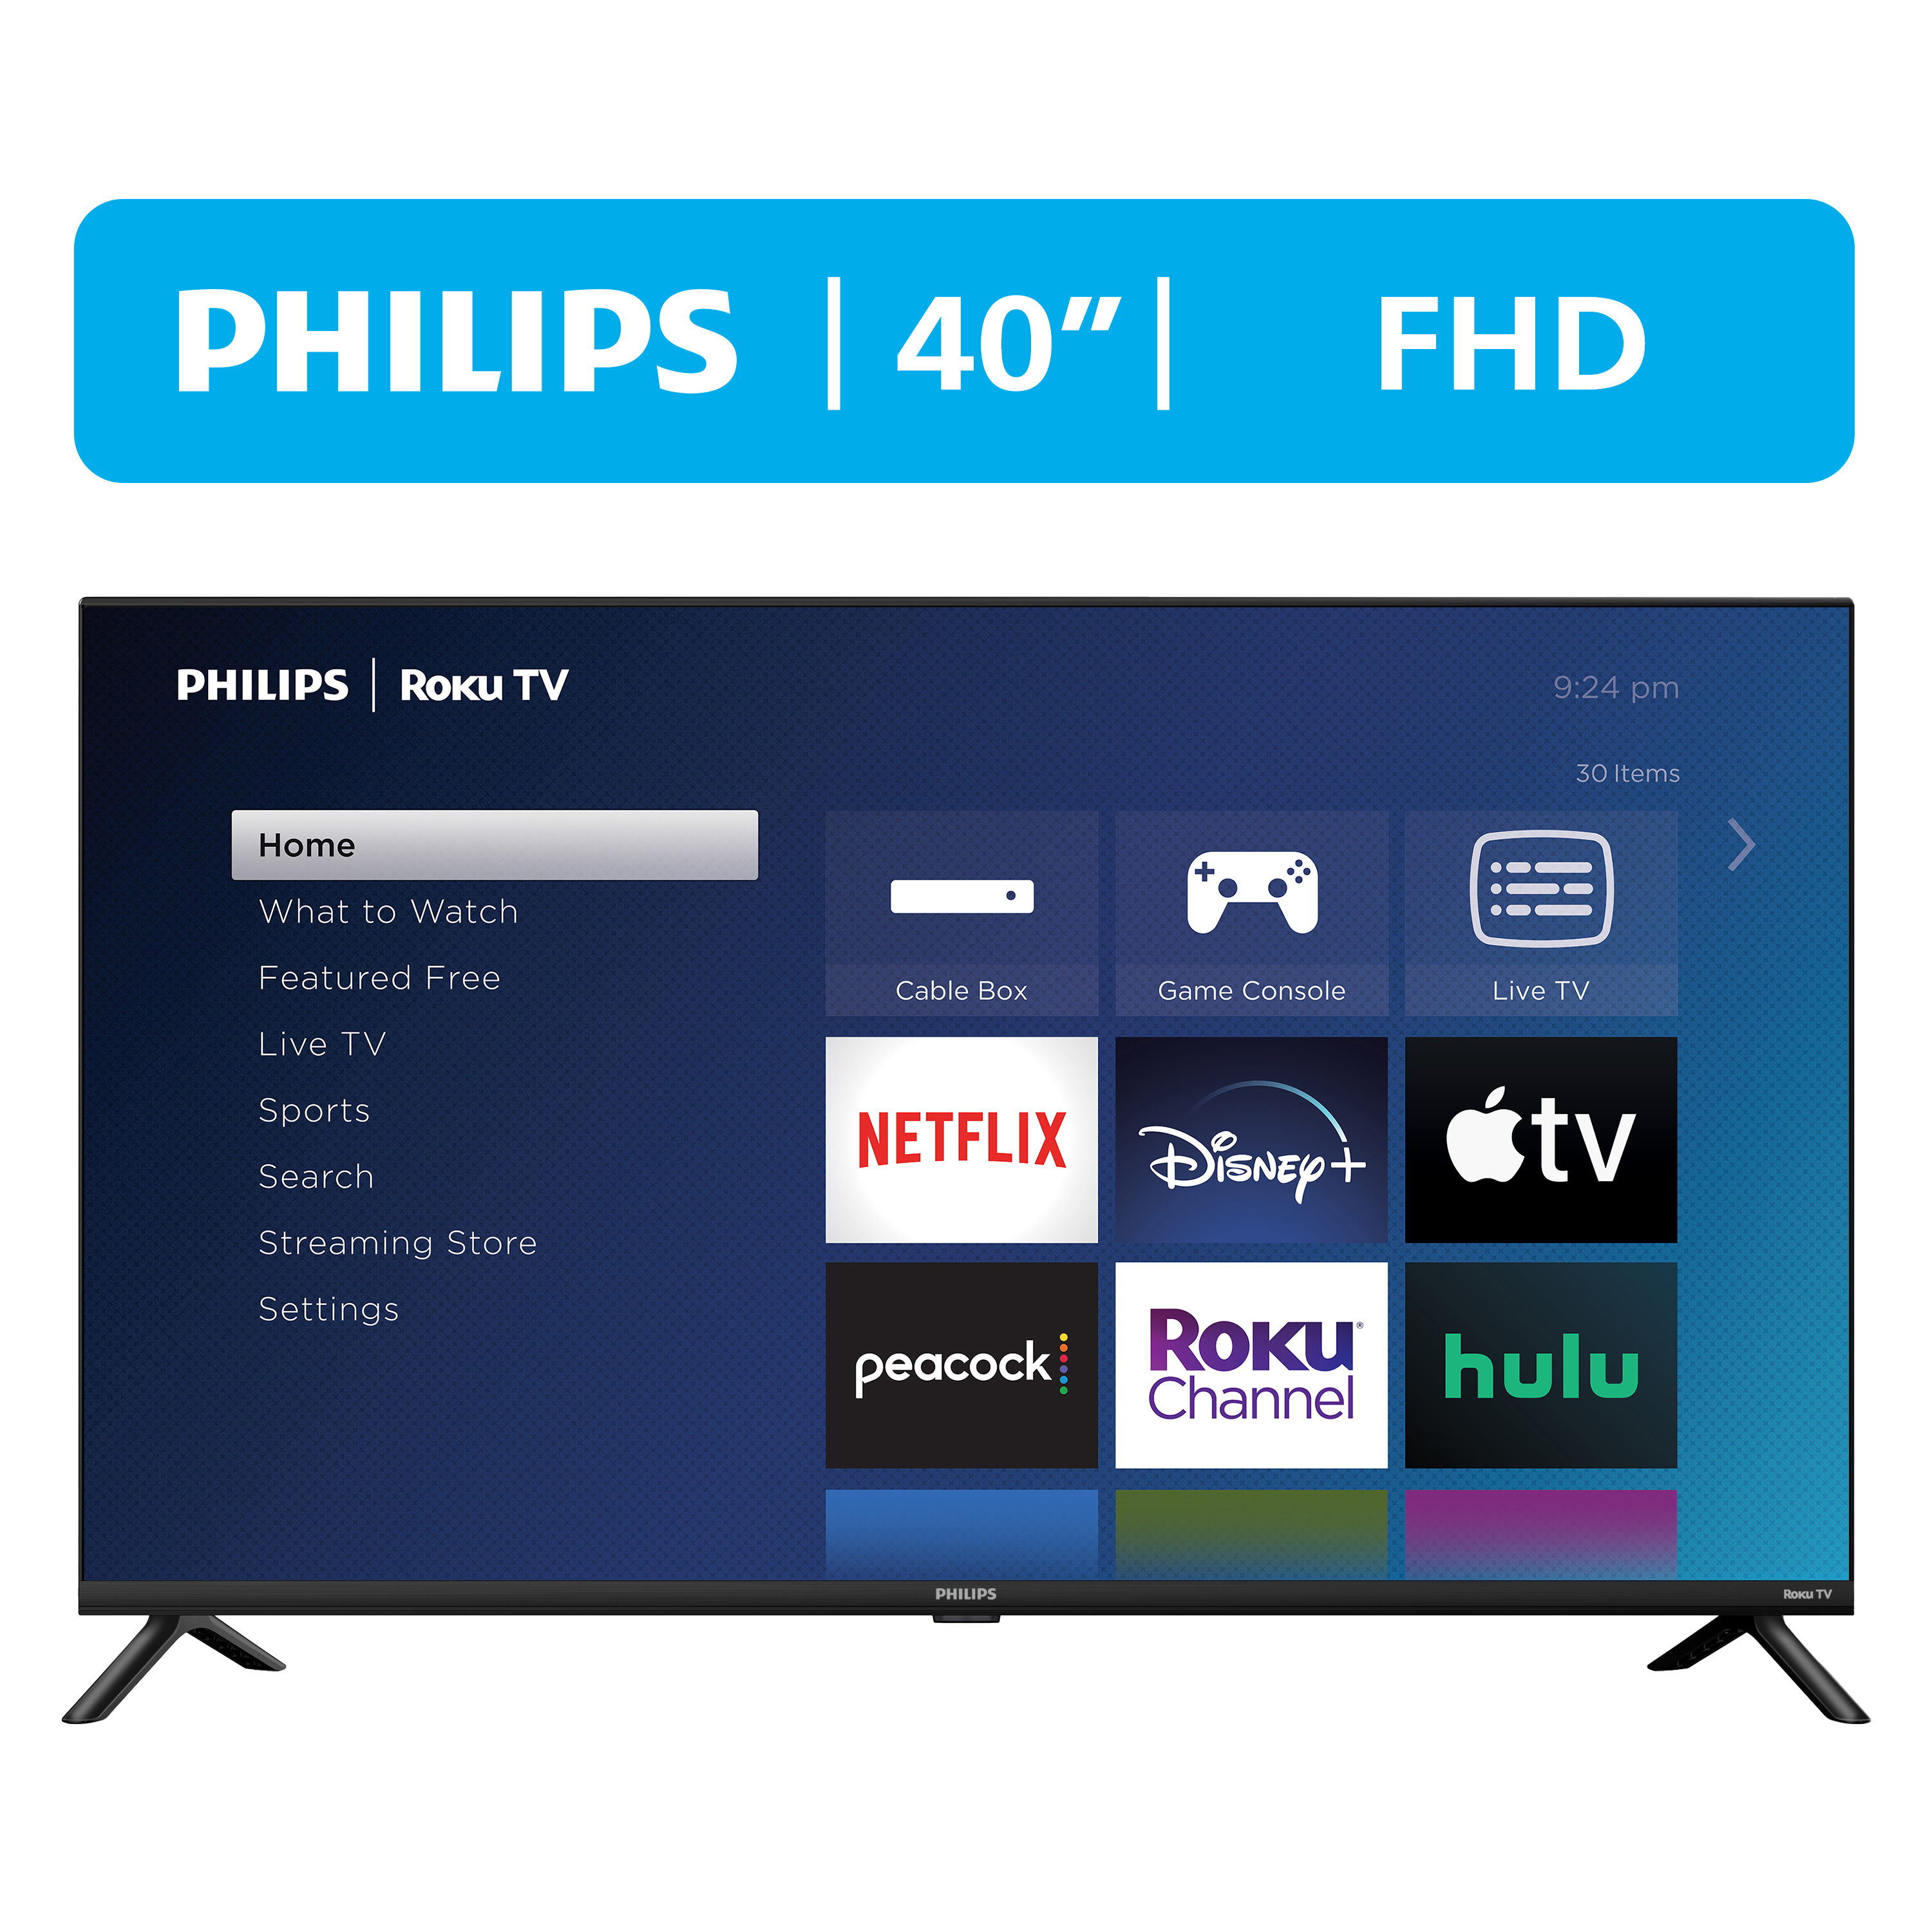 Philips 40" Class FHD (1080p) Roku Smart LED TV (40PFL6533/F7) (New) - image 1 of 17